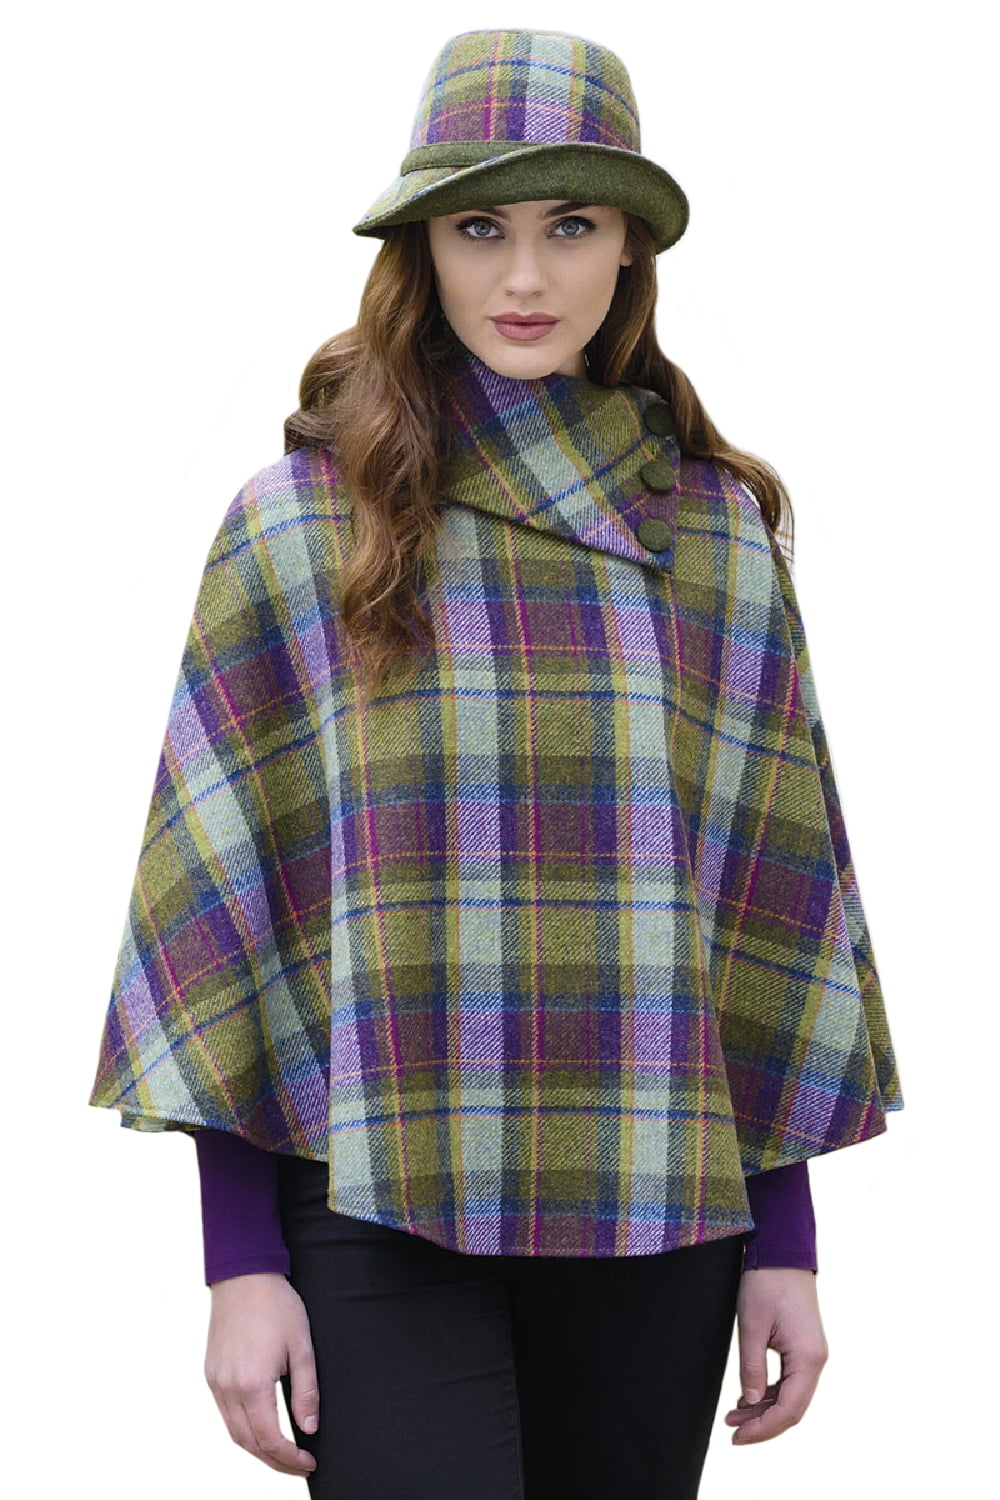 100% Irish Wool One Size Fits All Made in Ireland Mucros Weavers Ladies Plaid Poncho